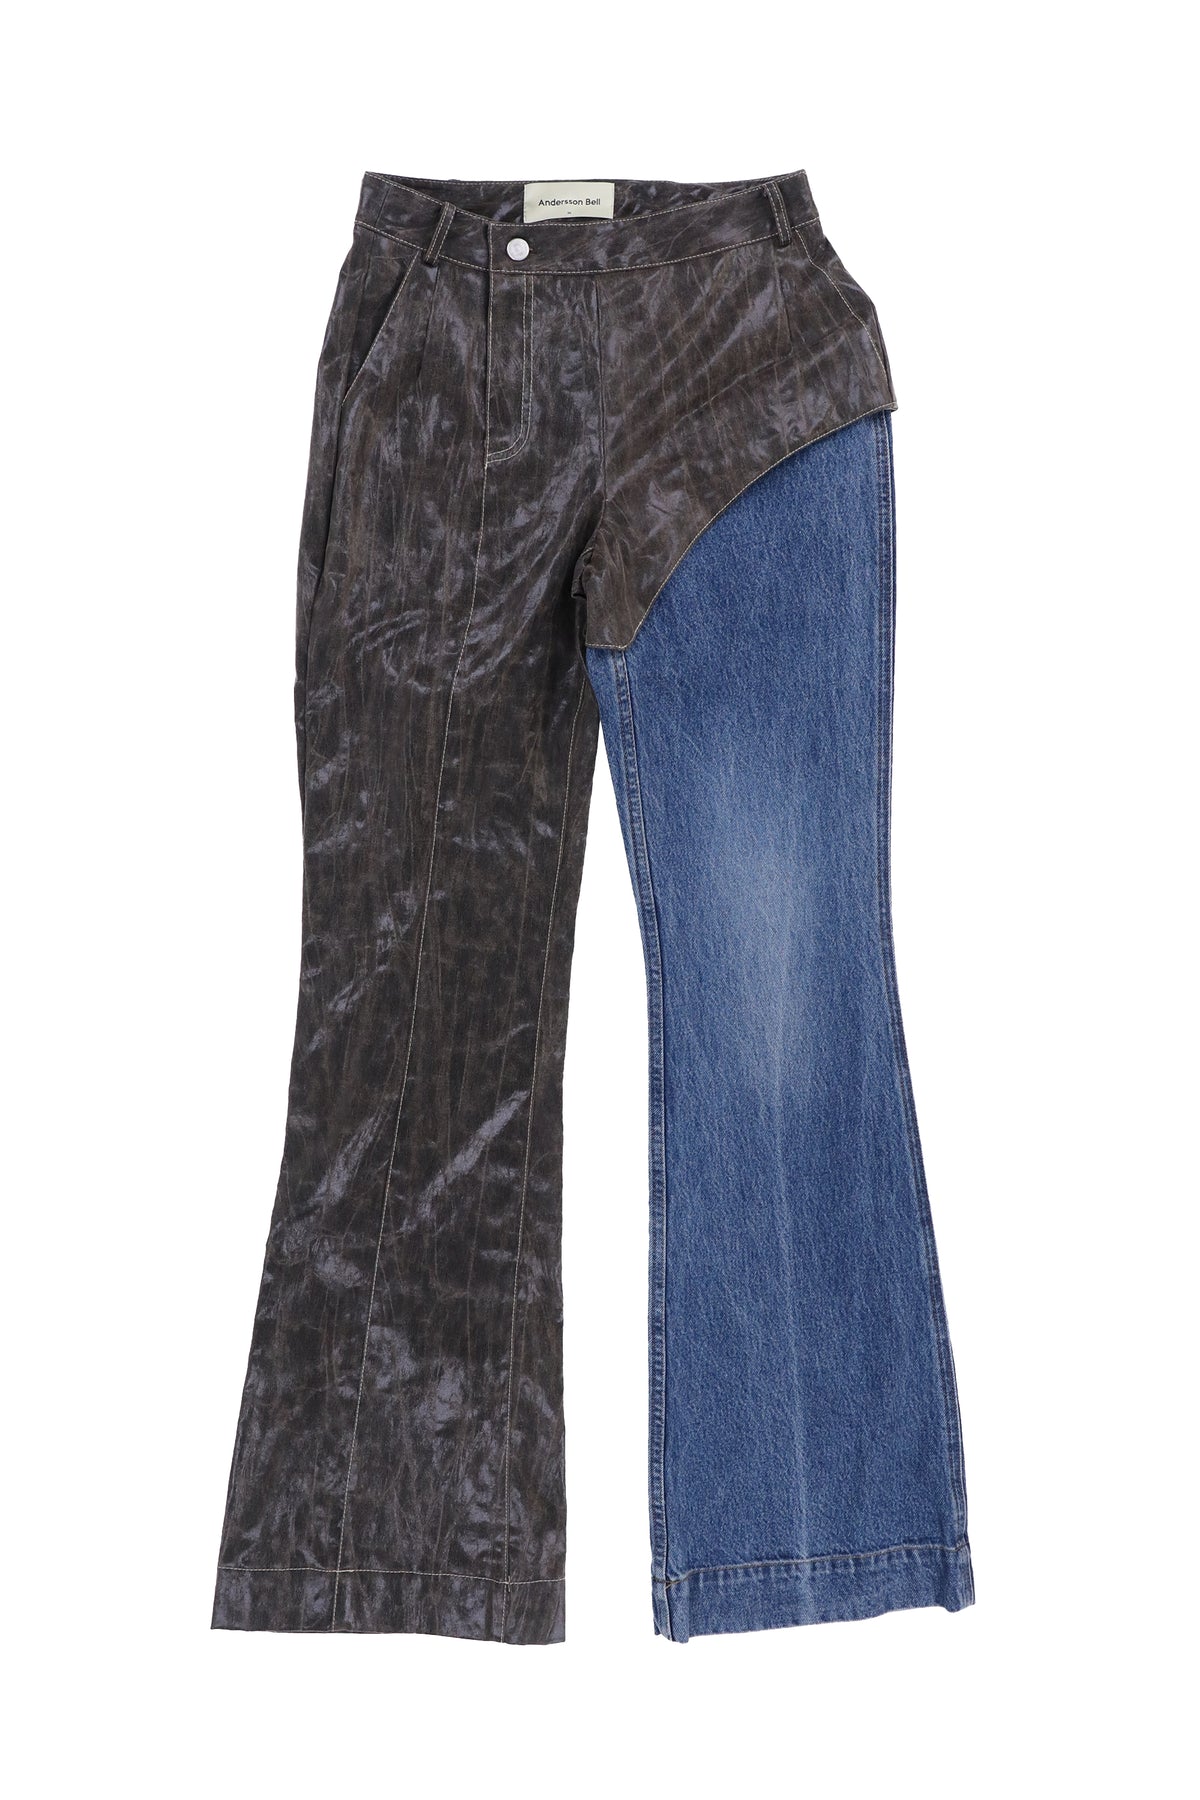 Andersson Bell LANCE JEANS / BRN